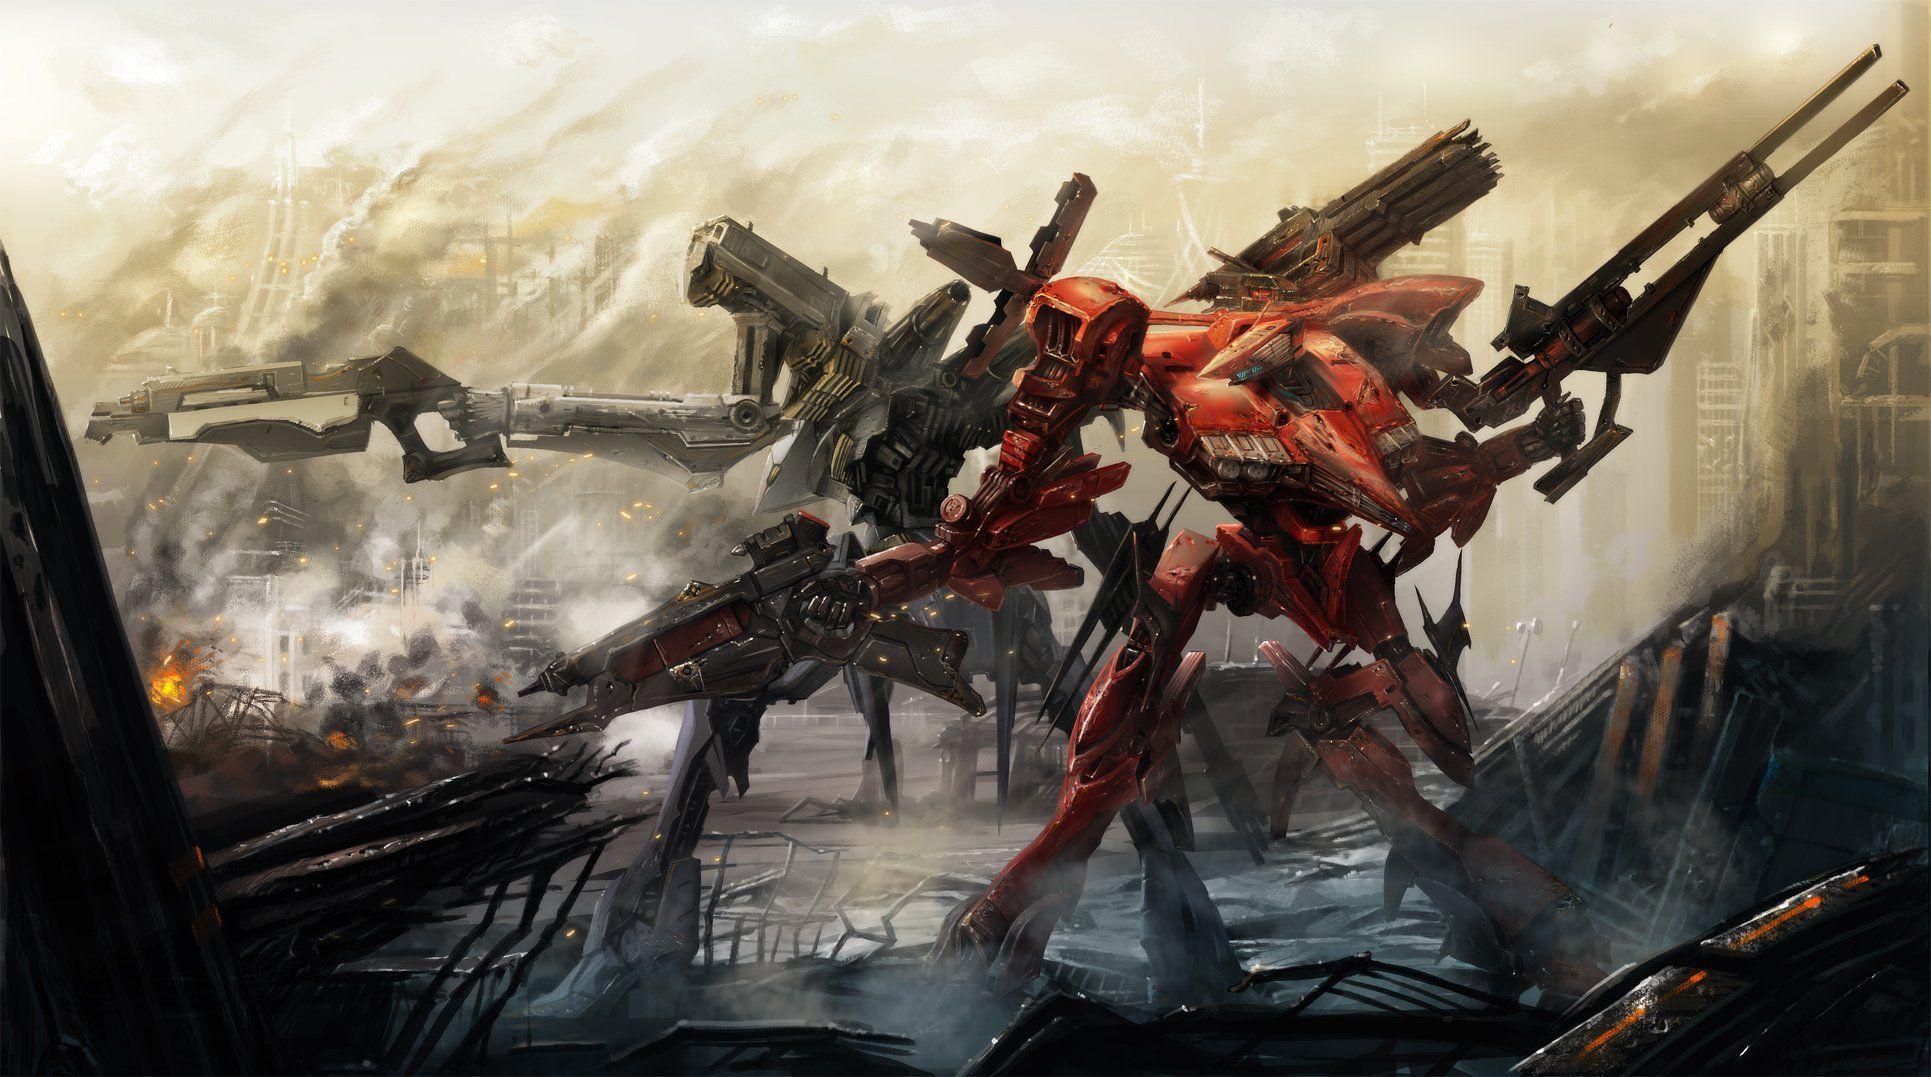 Armored Core VI: Fires of Rubicon download the new for windows